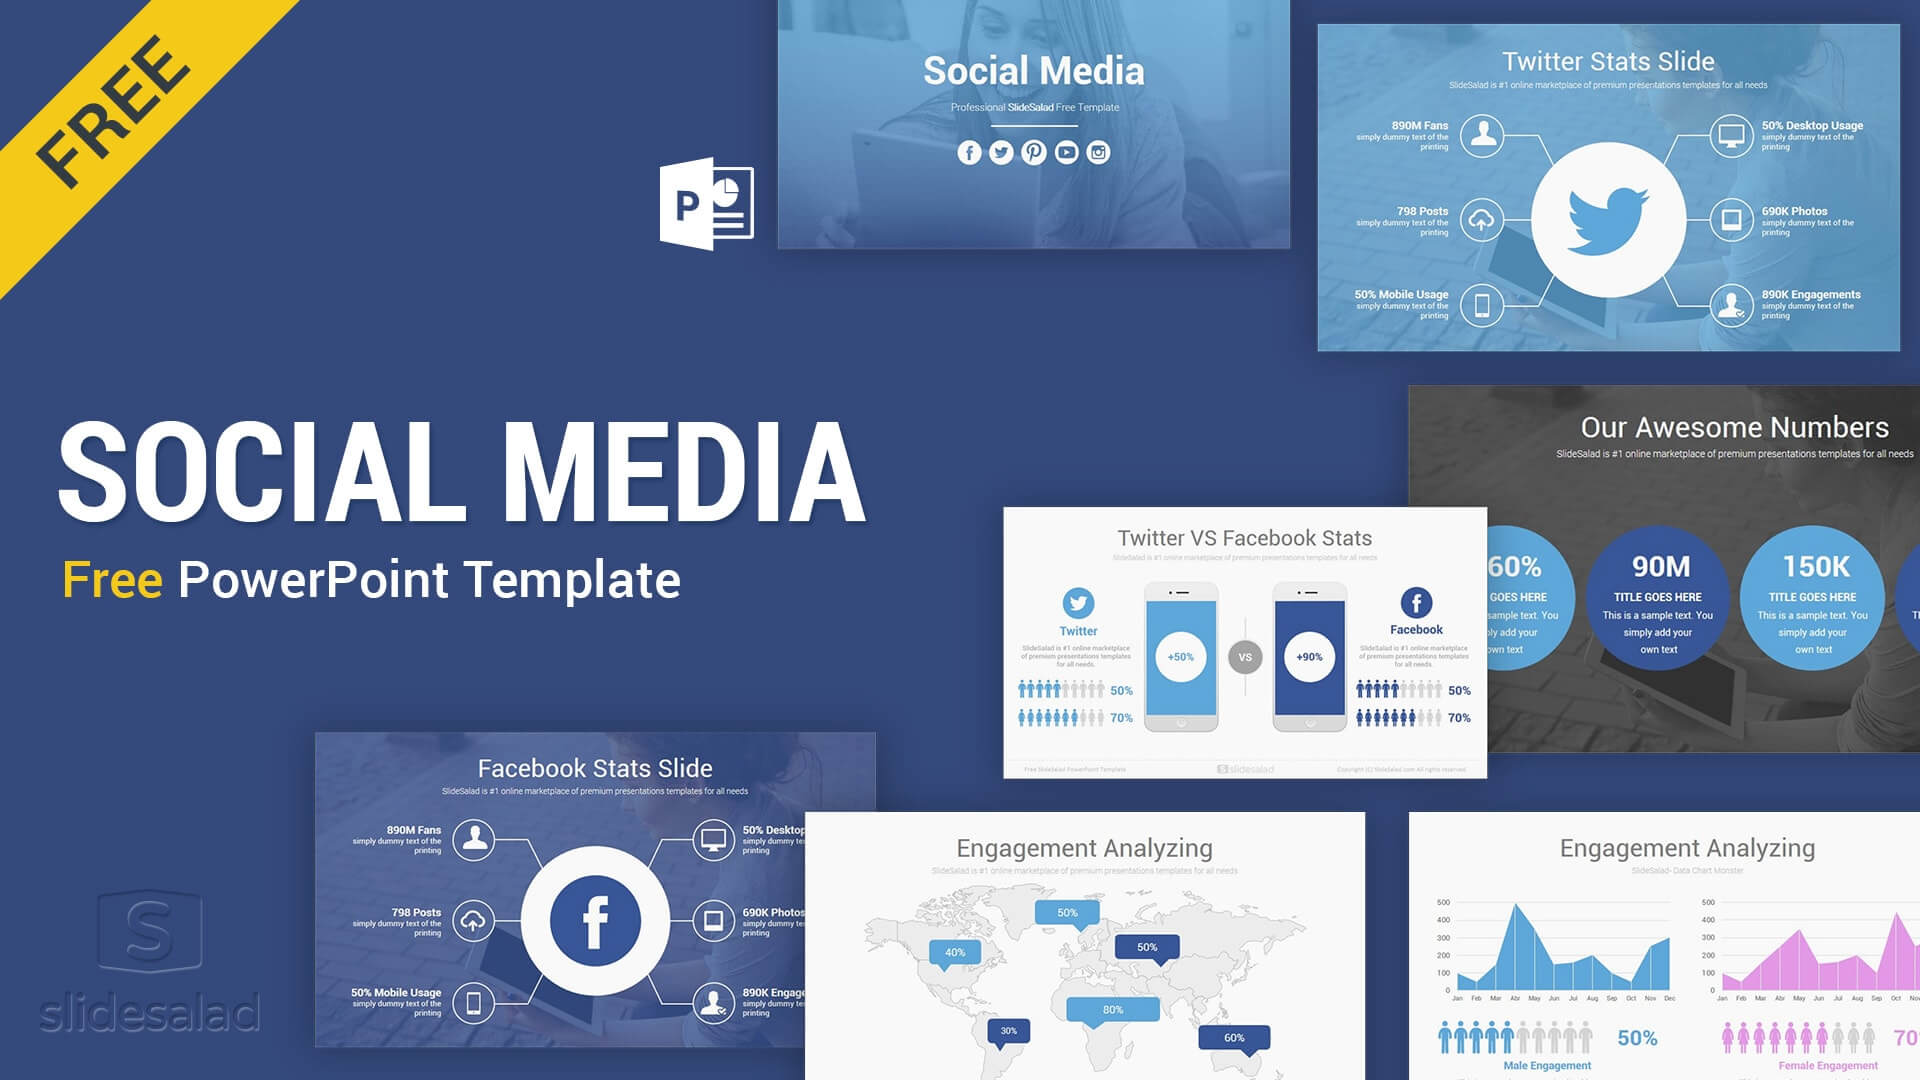 Social Media Free Powerpoint Template Ppt Slides – Slidesalad Intended For Raf Powerpoint Template